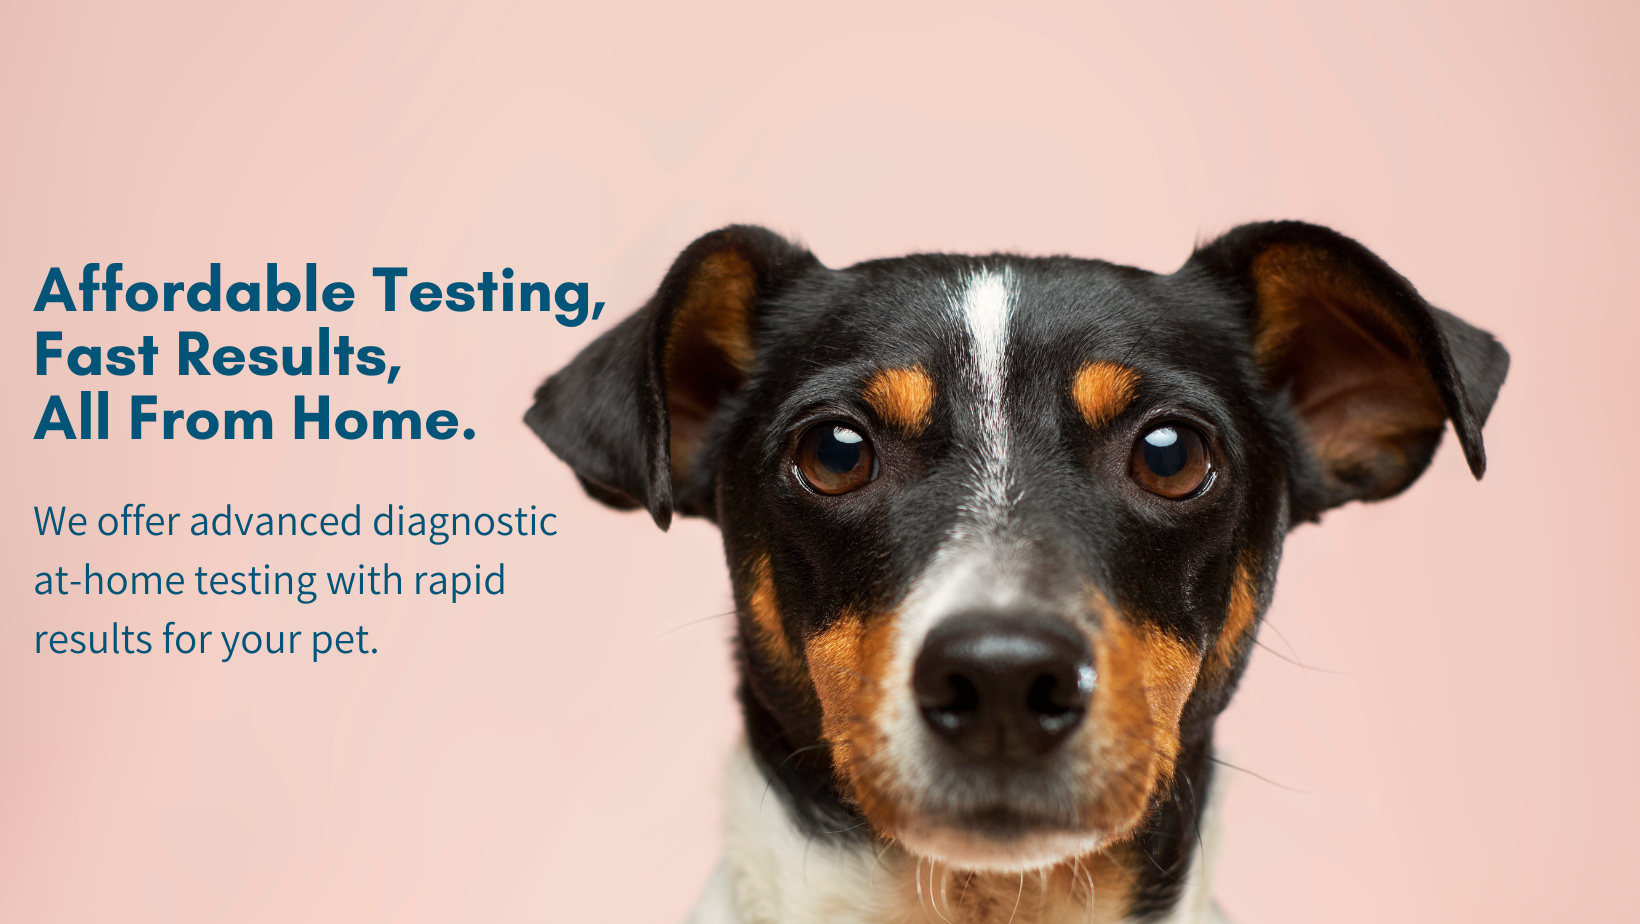 Kedi Labs Advanced Diagnostic At-Home Testing with Rapid Results for Your Pet